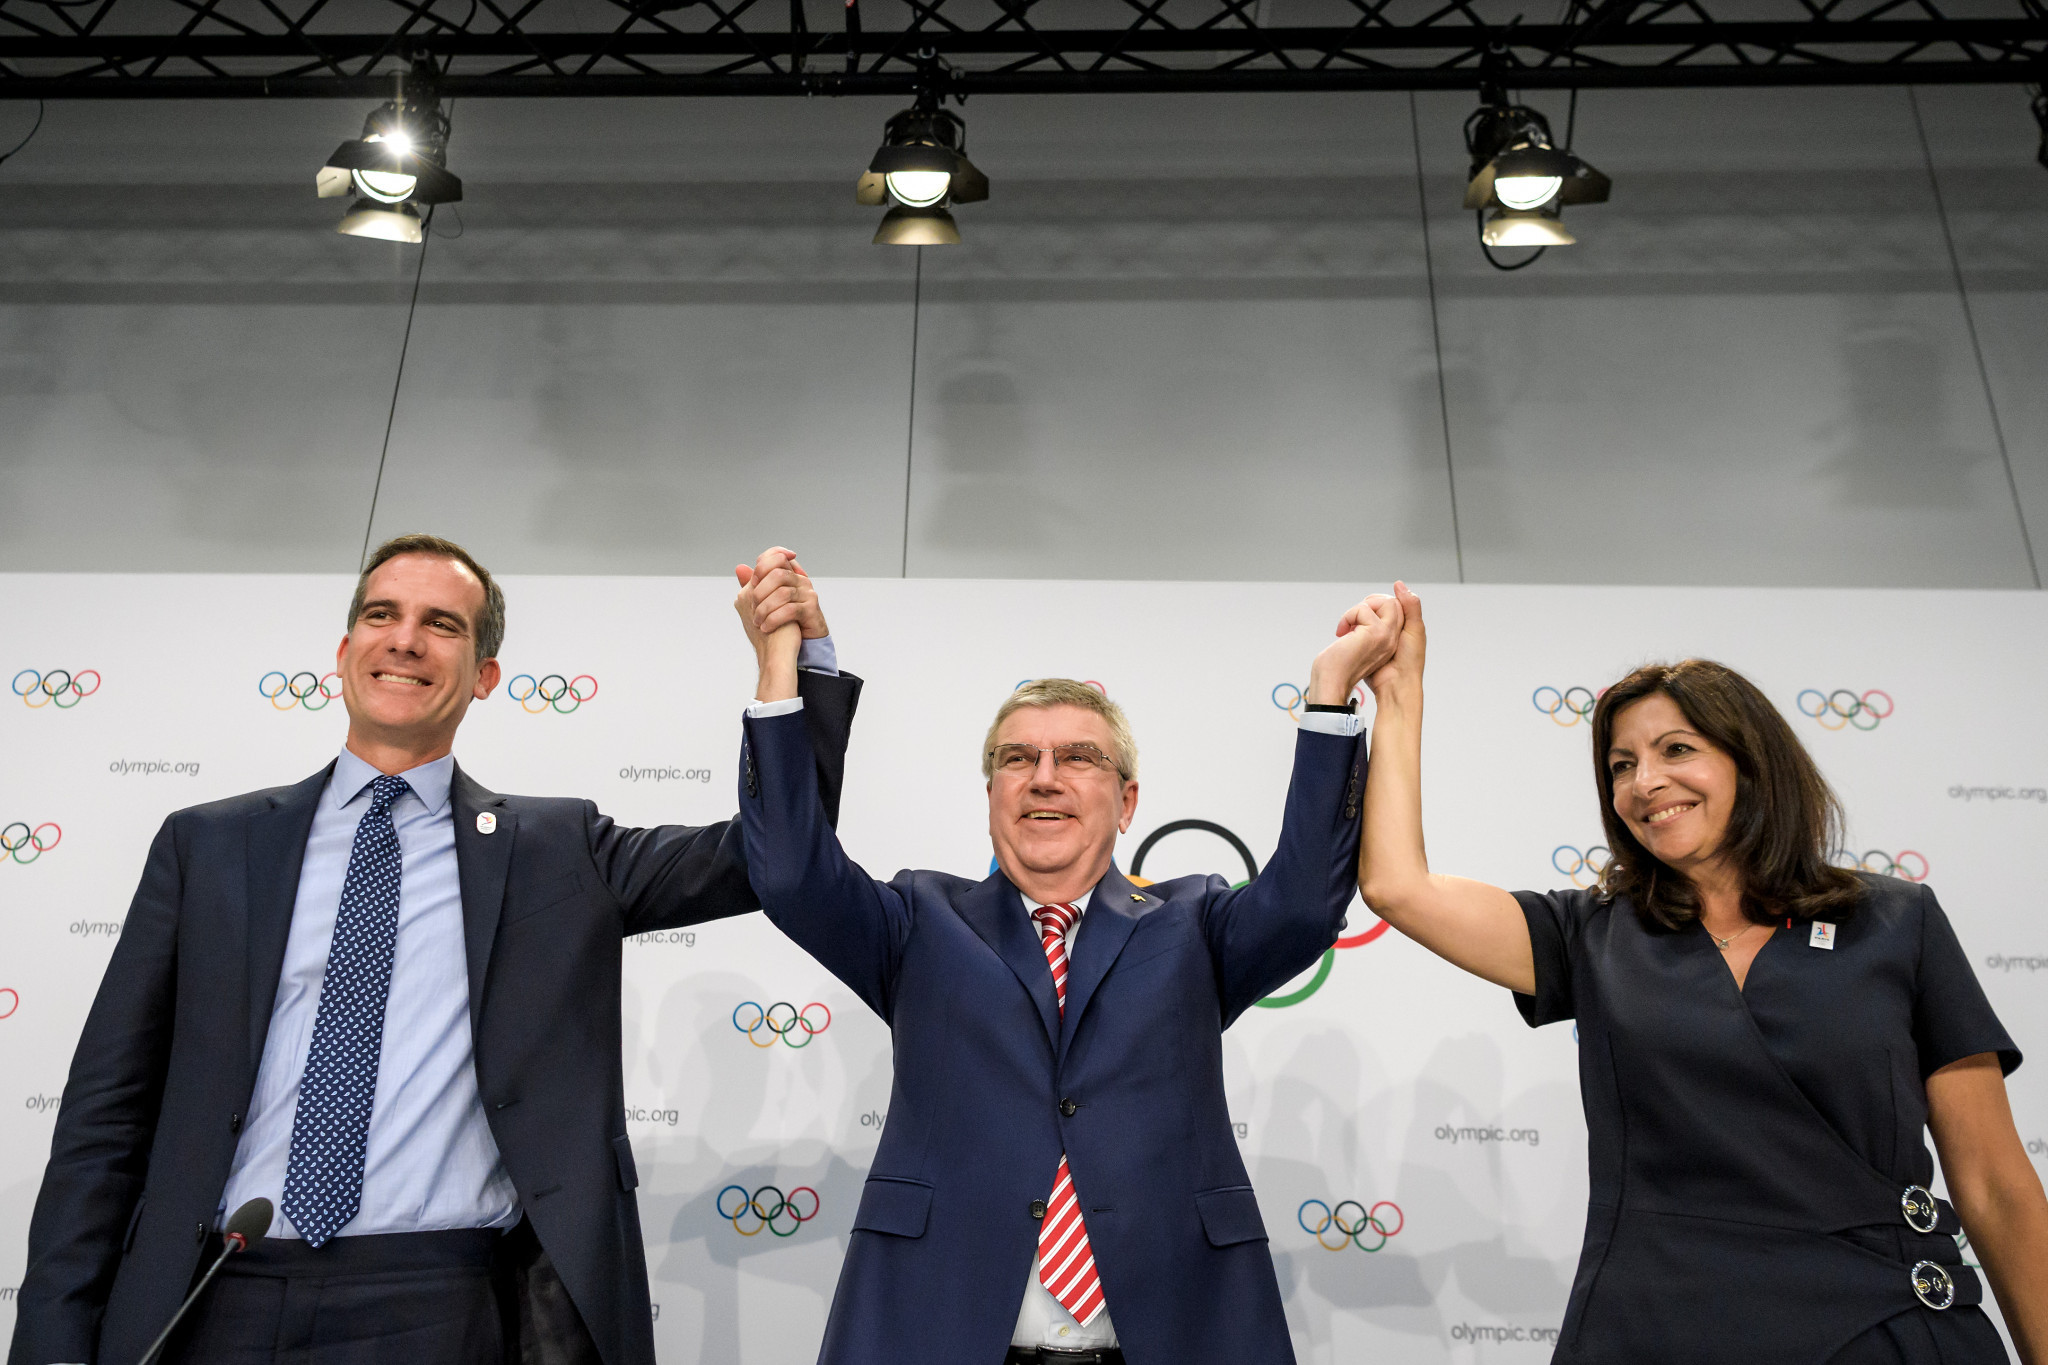 IOC President Thomas Bach said the "historic double allocation" was a win-win for the cities of Paris and Los Angeles ©Getty Images